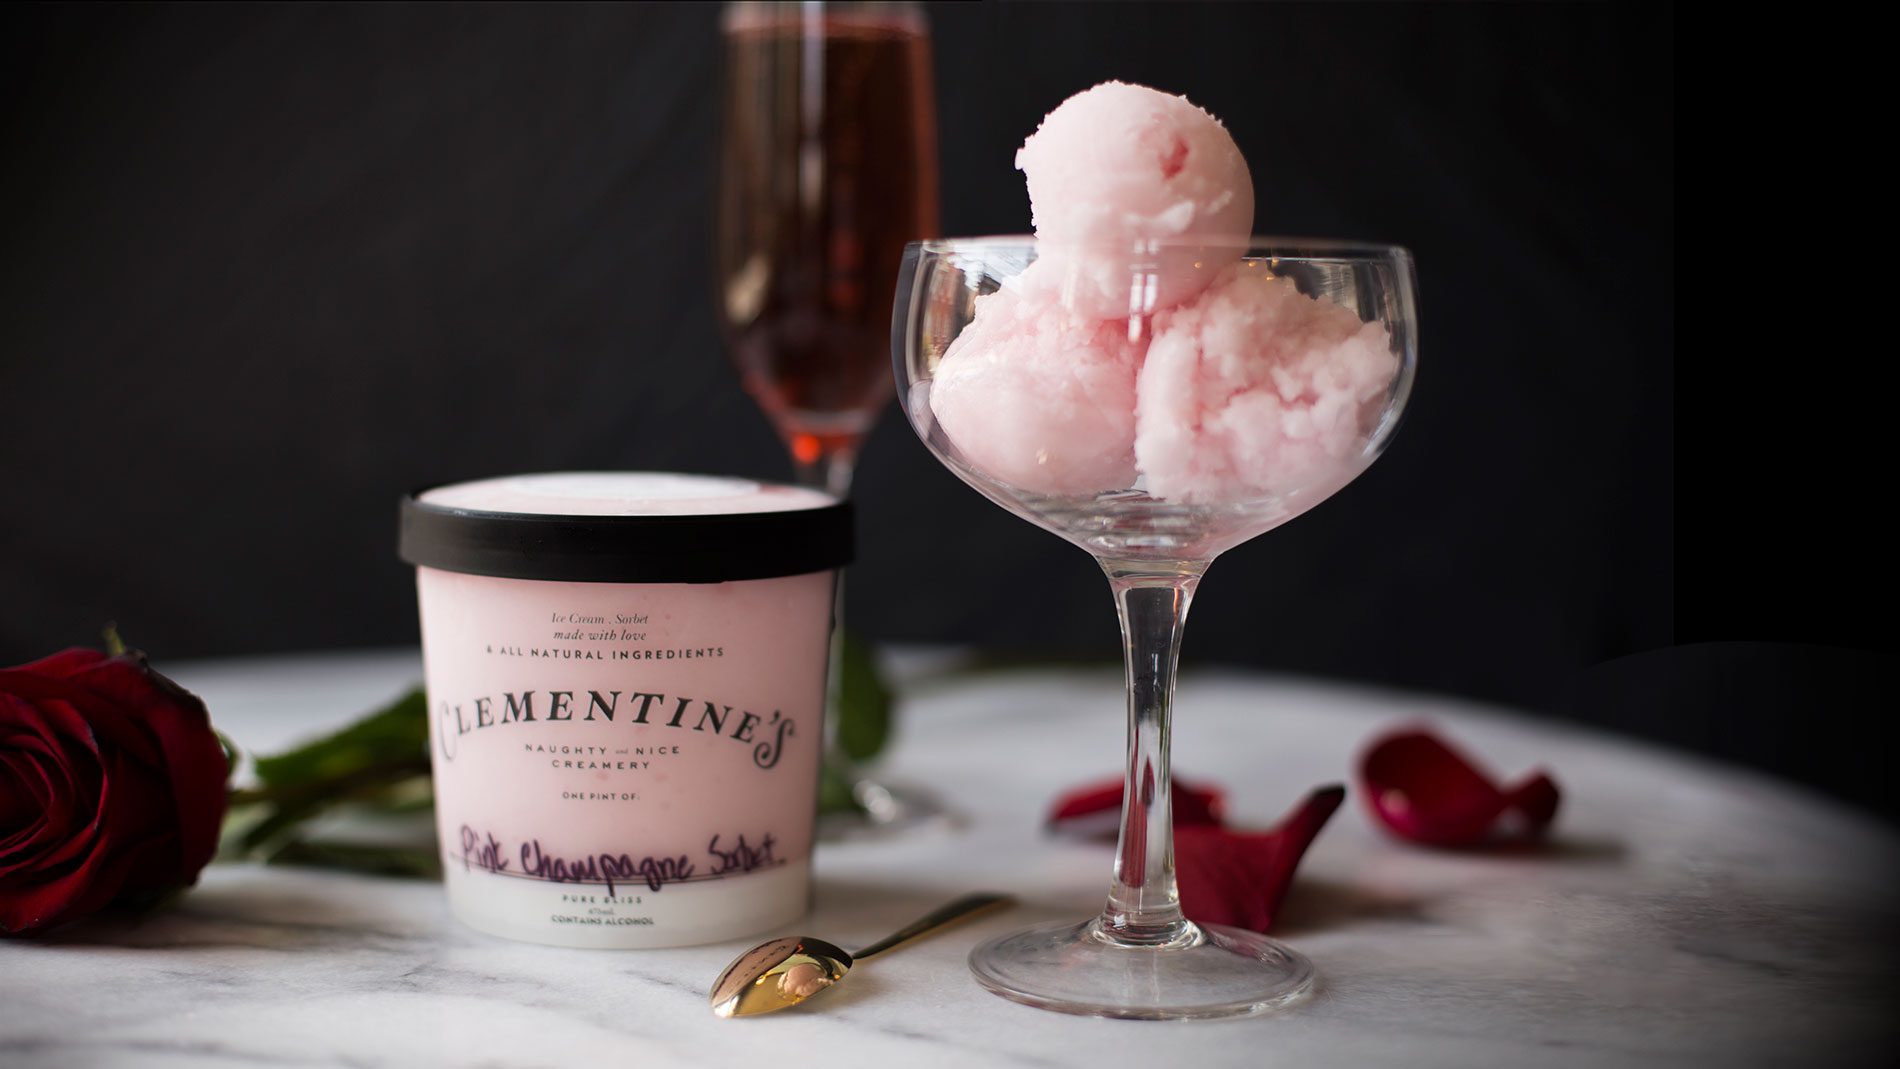 pink champagne sorbet from clementine's naughty & nice creamery